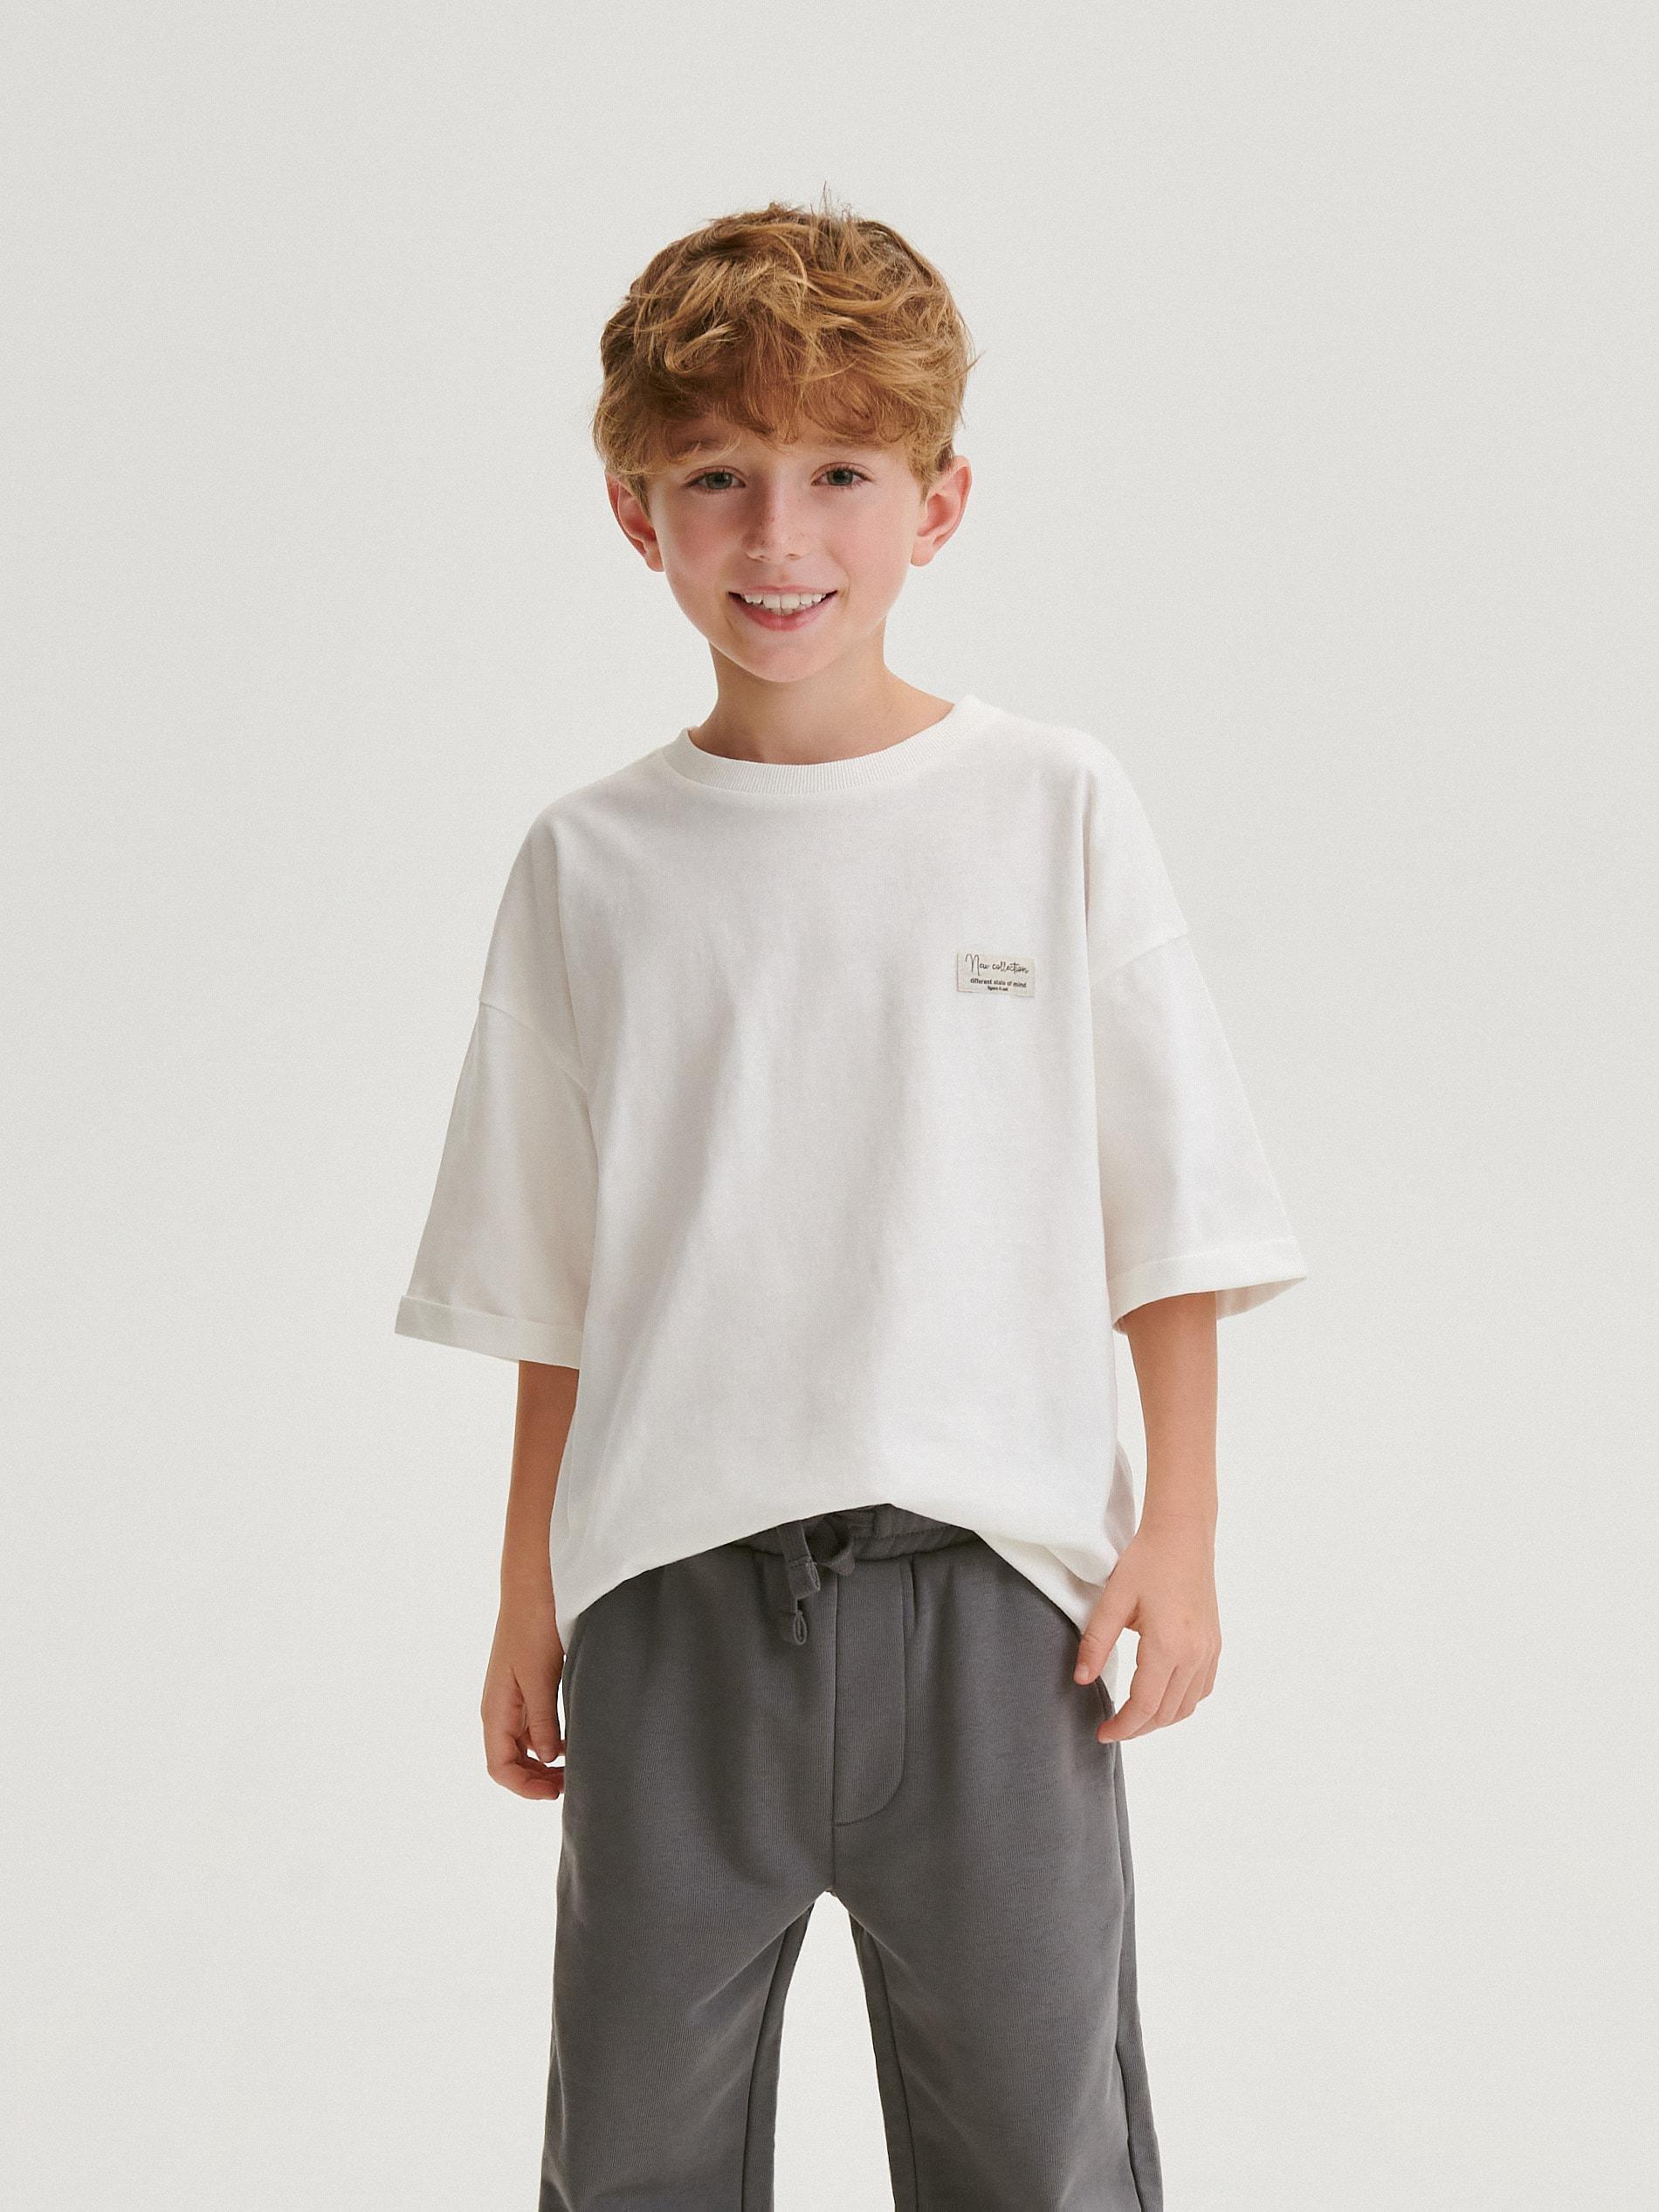 Reserved - Grey Cotton Joggers, Kids Boys